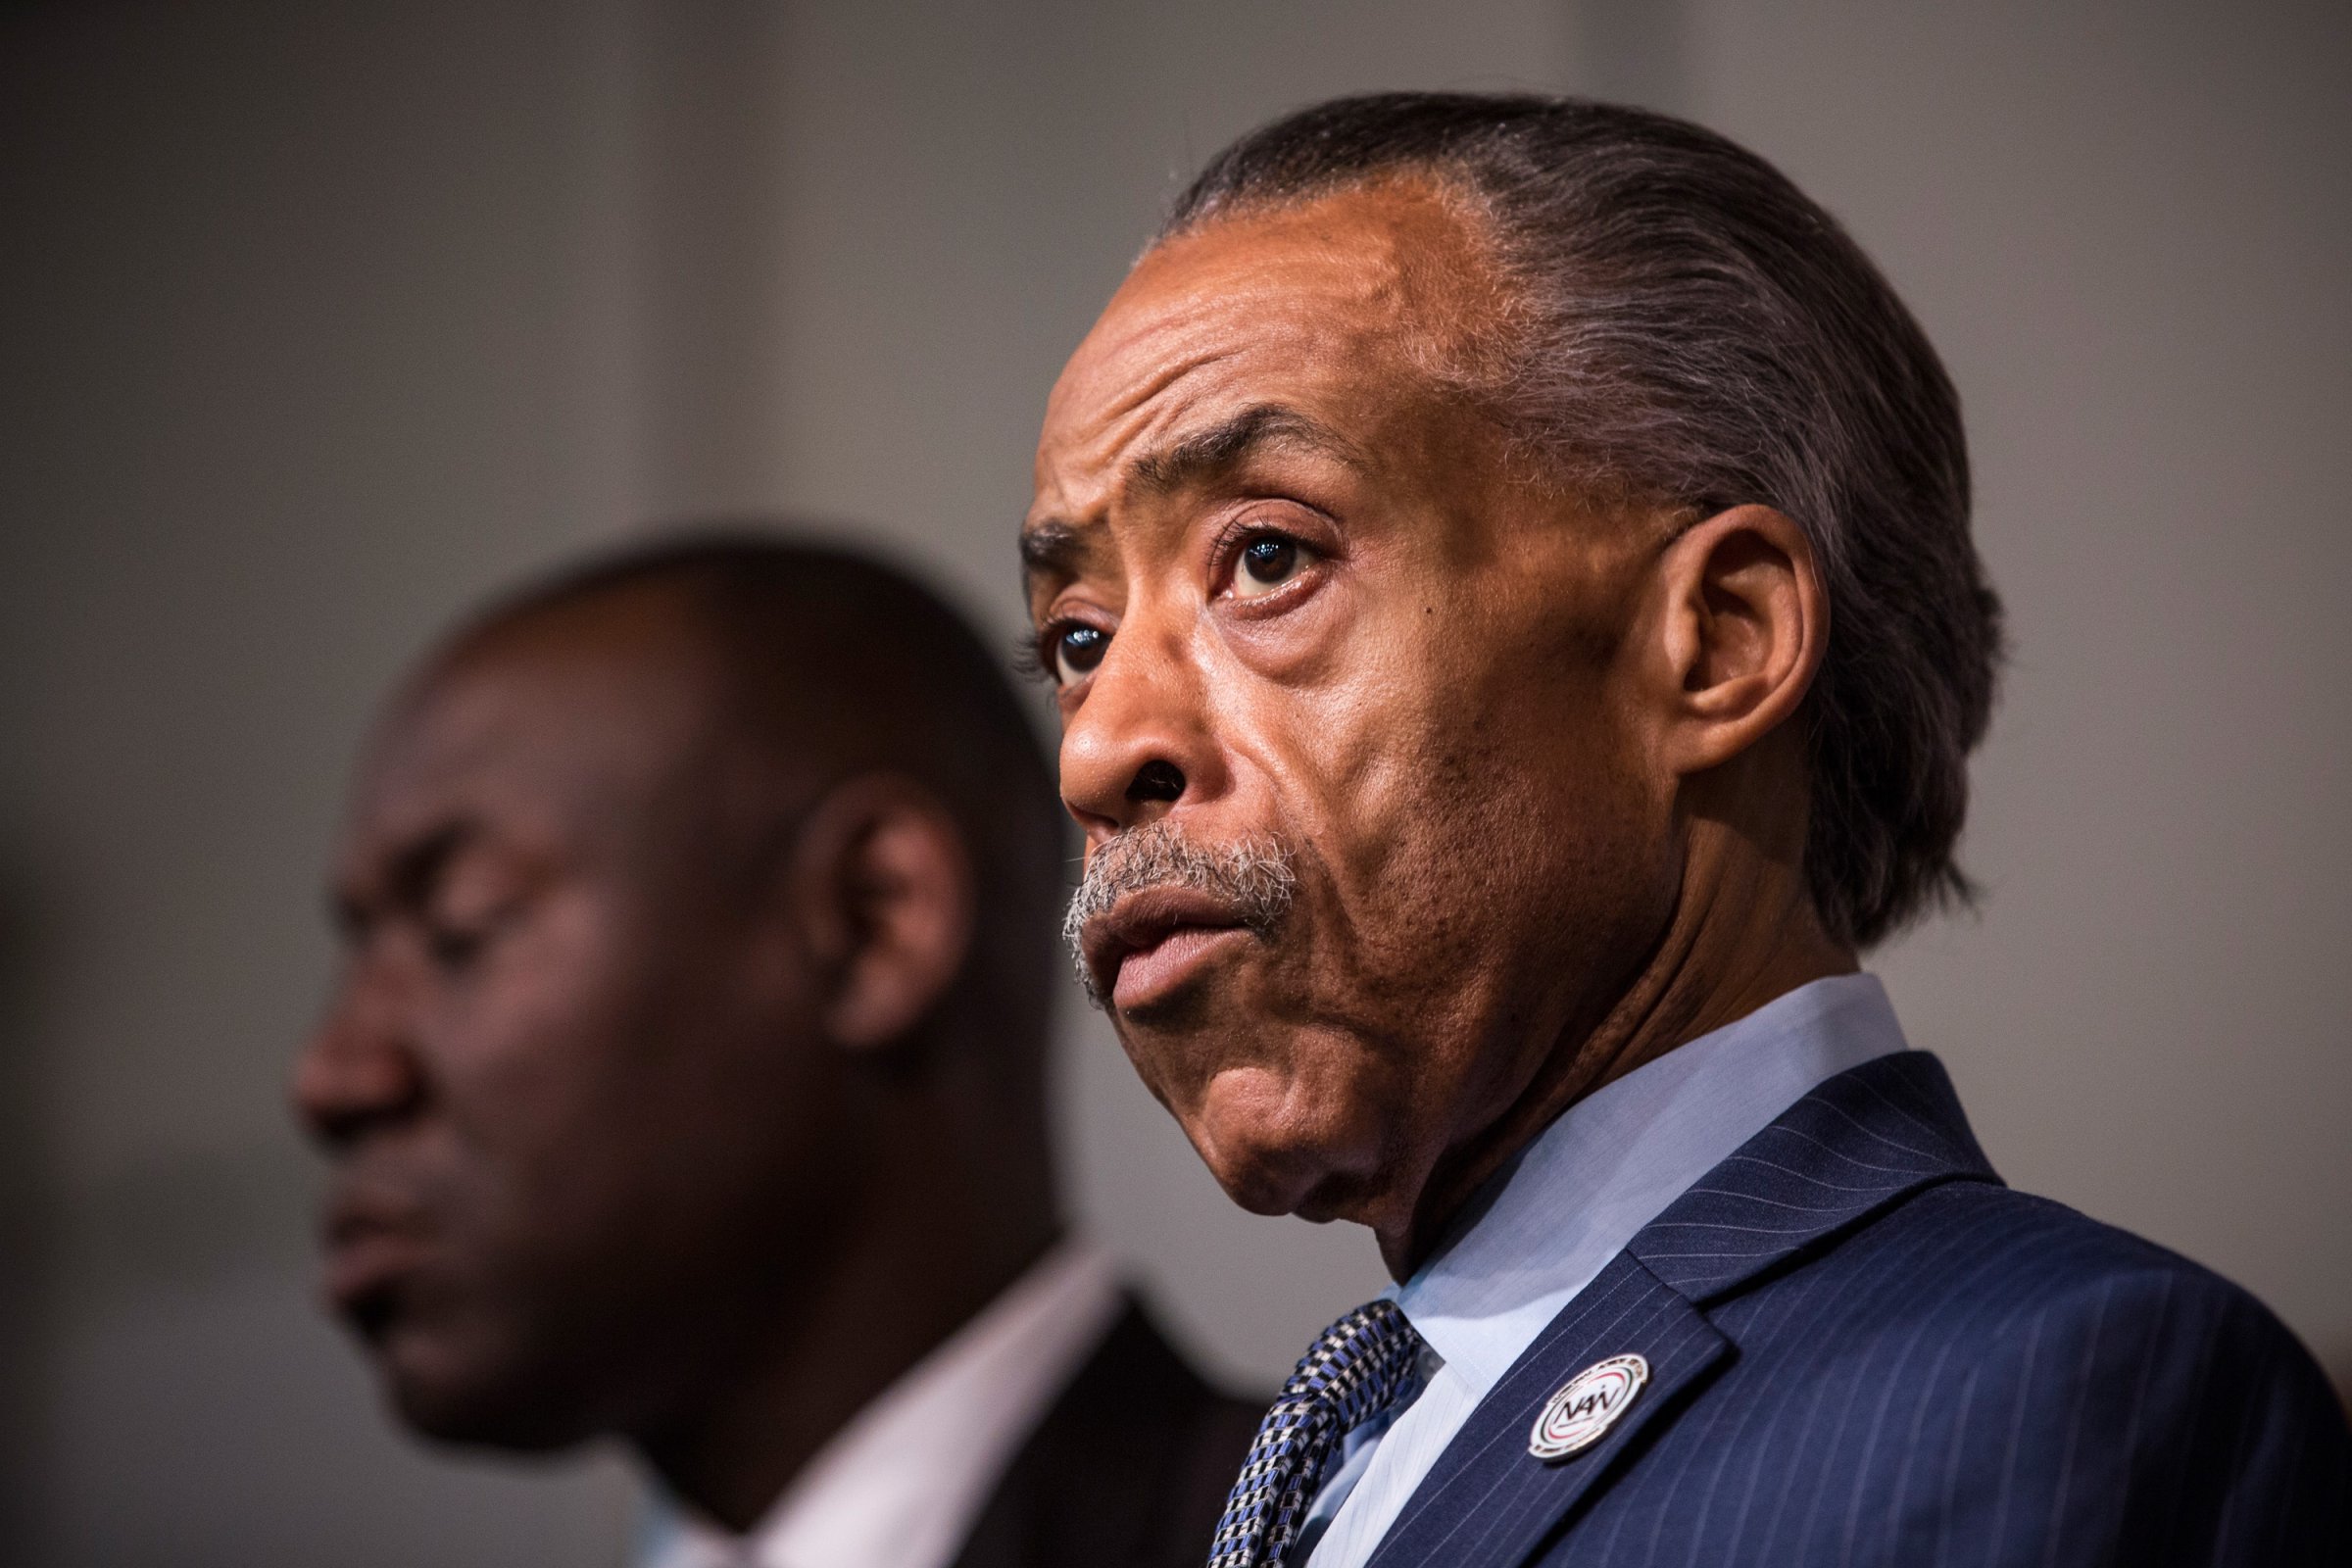 Reverand Al Sharpton speaks at a press conference on the eve of Thanksgiving to pray and address the events of the last few days regarding the grand jury verdict of police officer Darren Wilson on Nov. 26, 2014 in New York.